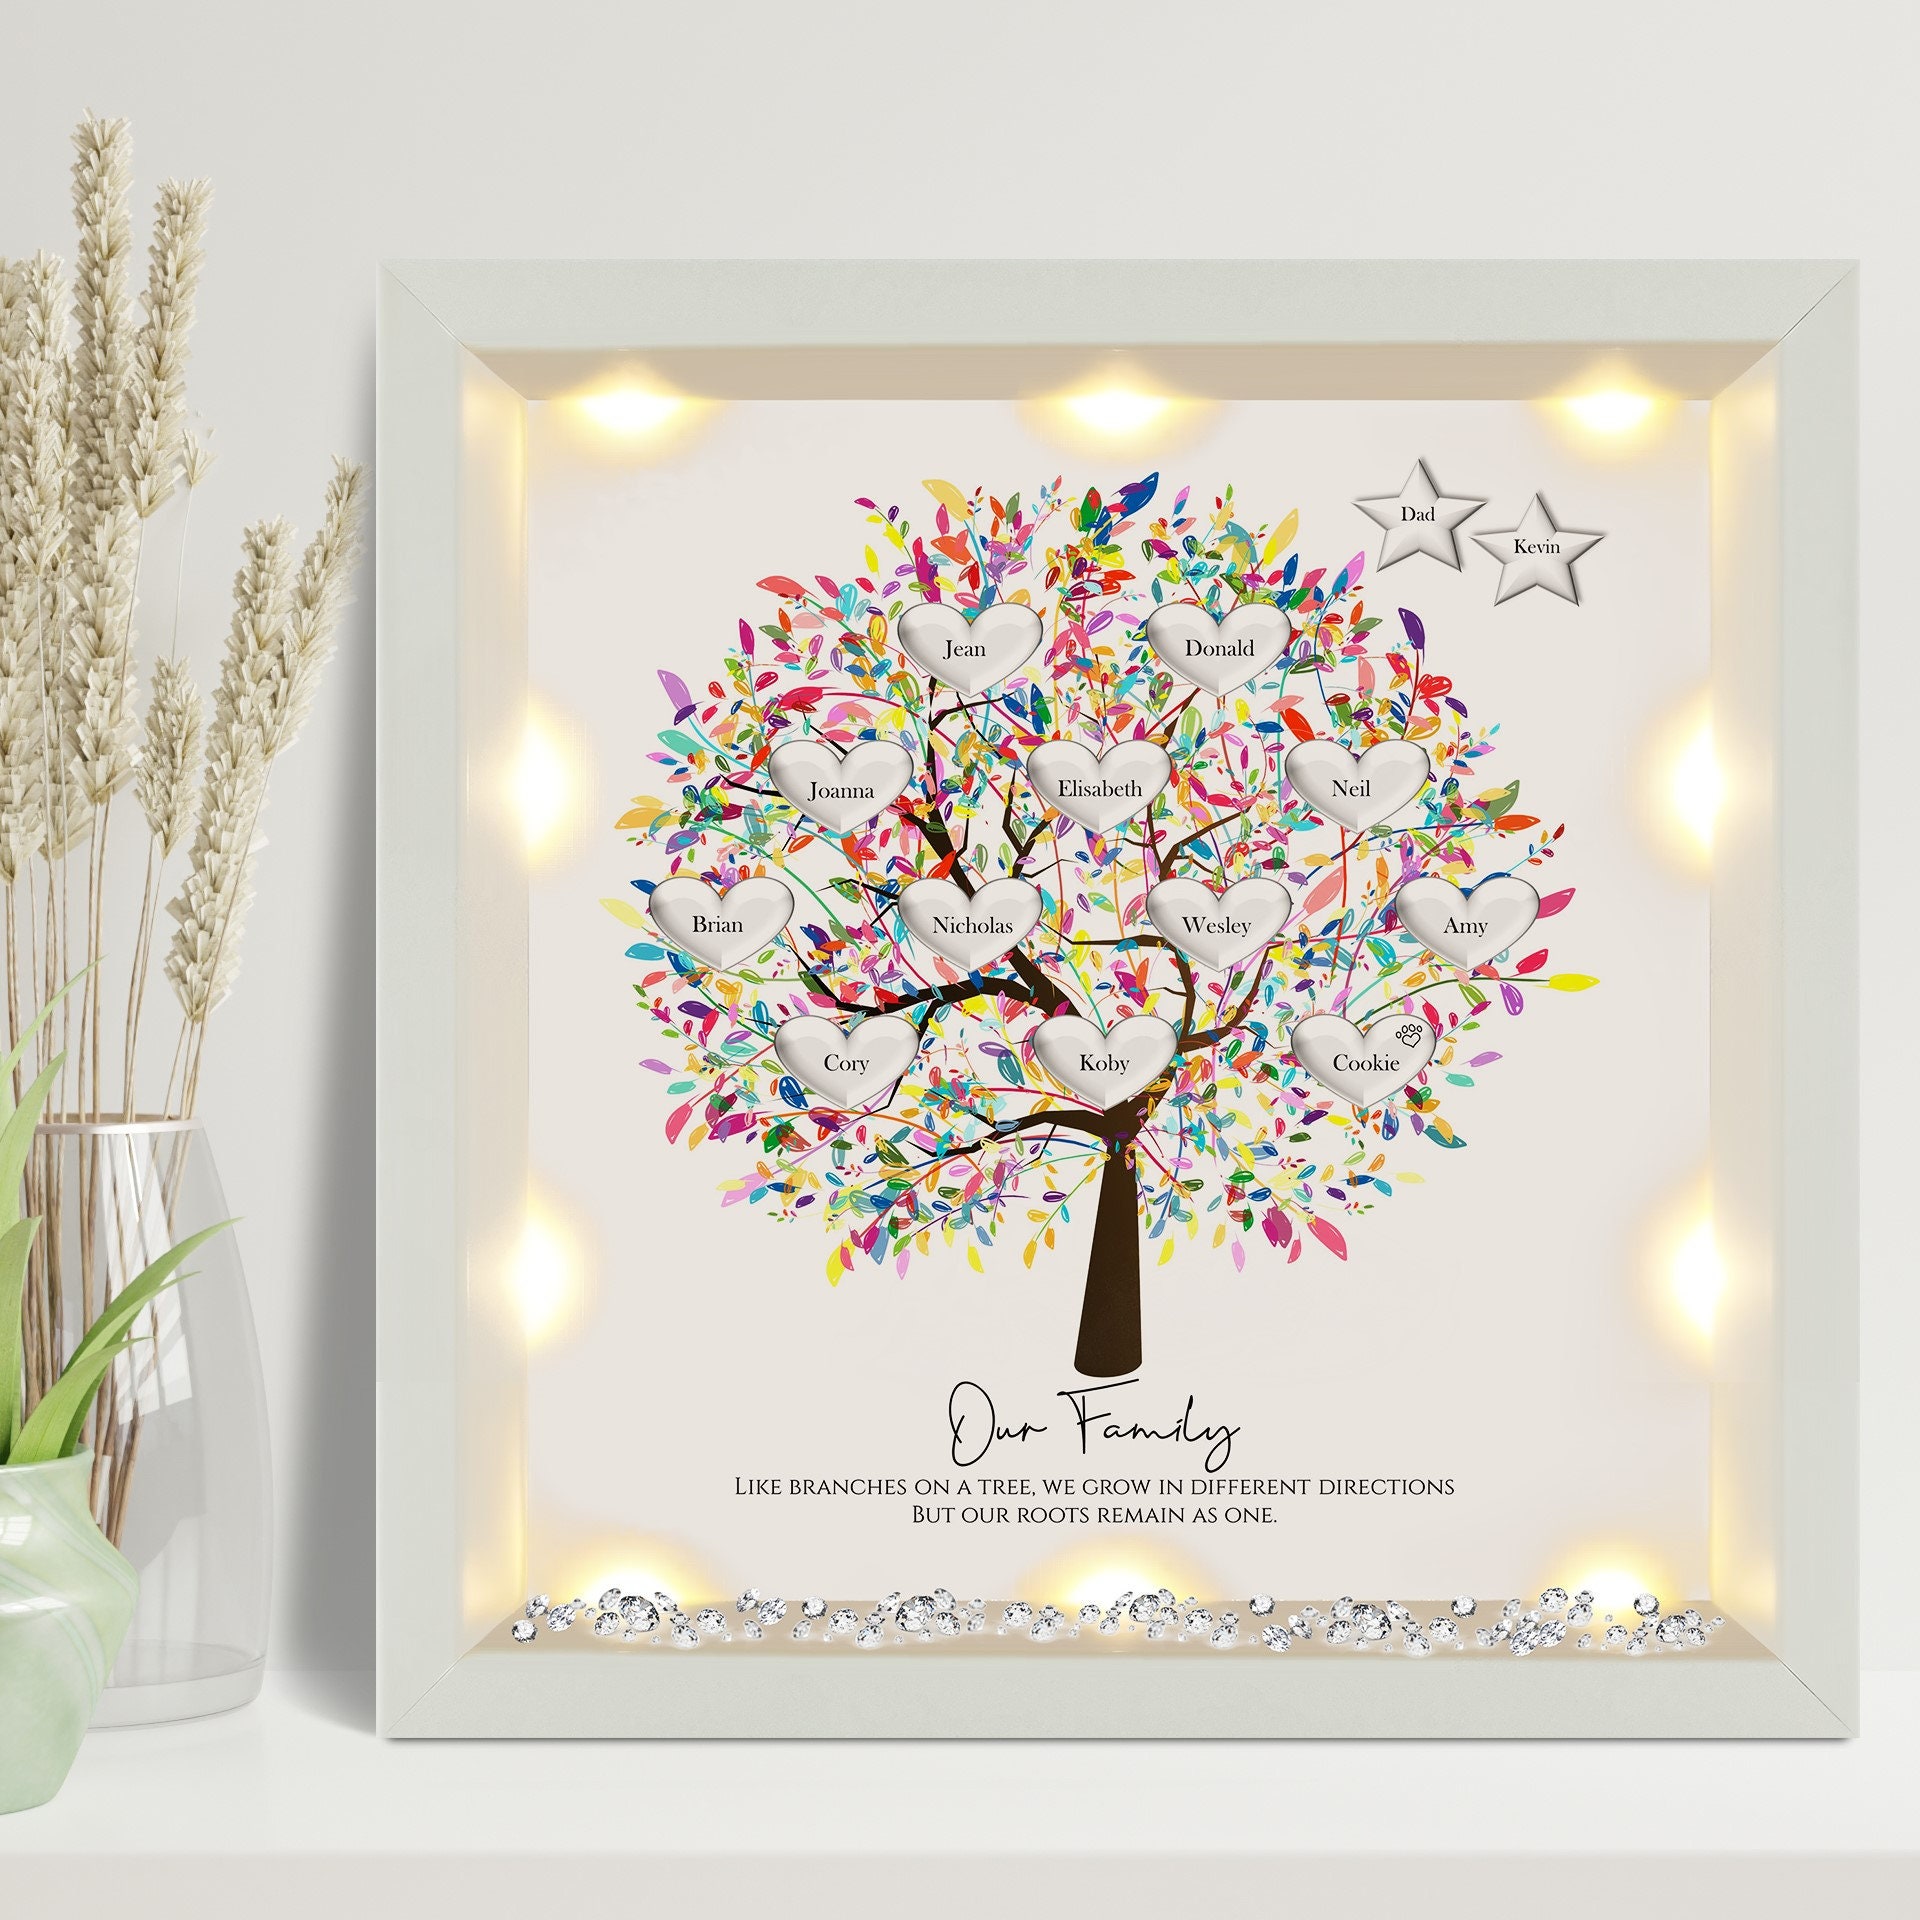 Personalized Family Tree Signs, Family Tree Wall Art, Gift for Grandparents  With Kids Names, Anniversary Gifts, Chirstmas Gifts for Family - Etsy | Family  tree wall hanging, Family tree wall art, Family